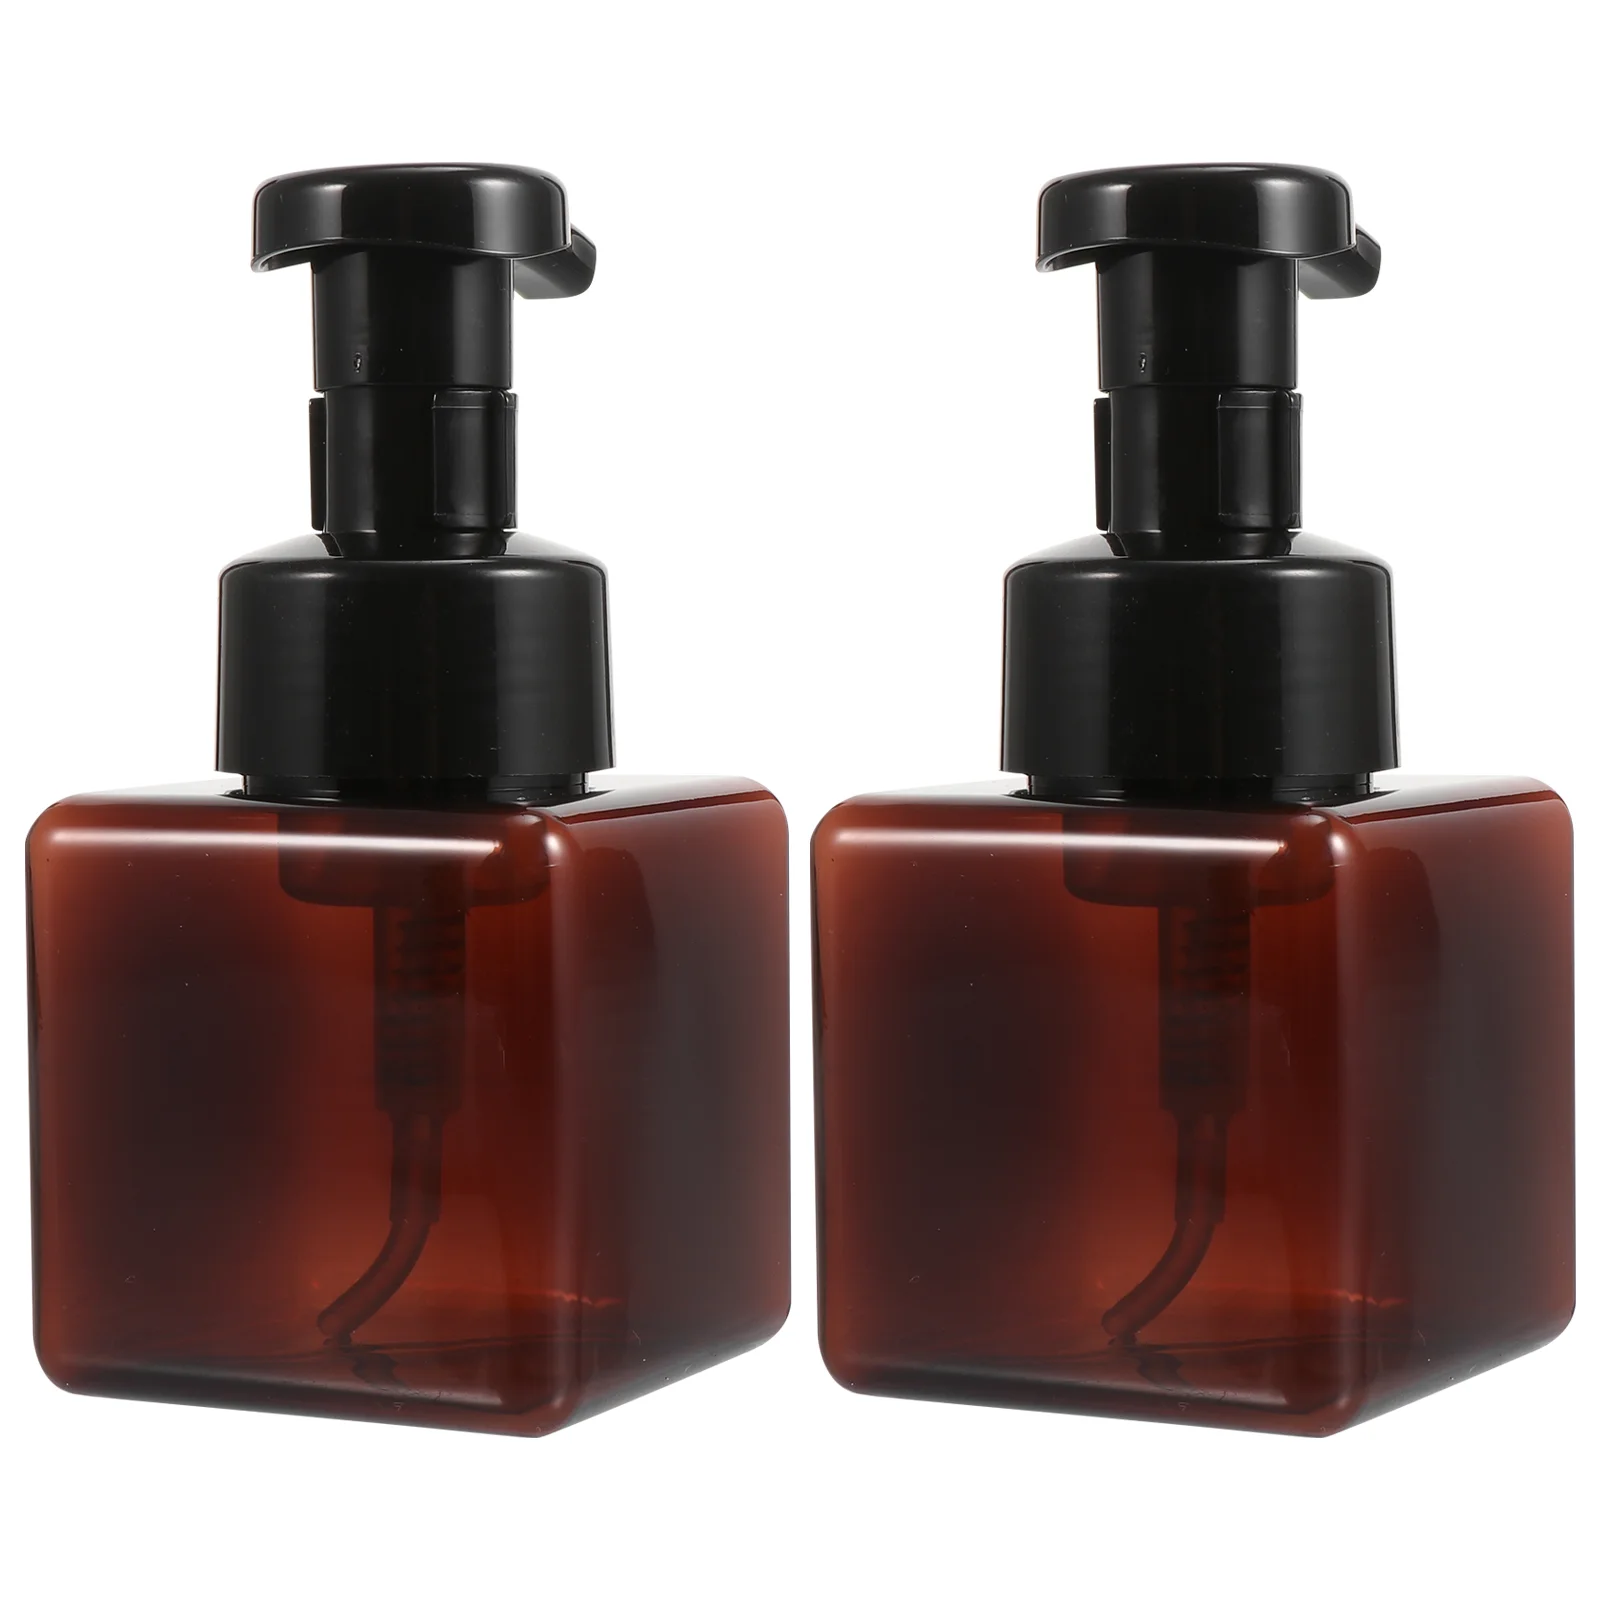 Hand Soap Dispenser Foaming Hand Bottle: 2pcs 250ml Lotion Cleanser Dispenser Pump Container for Bathroom Vanities Kitchen Brown electric water pump water dispenser household foldable barreled water smart water bottle pump kitchen chargeable suction device